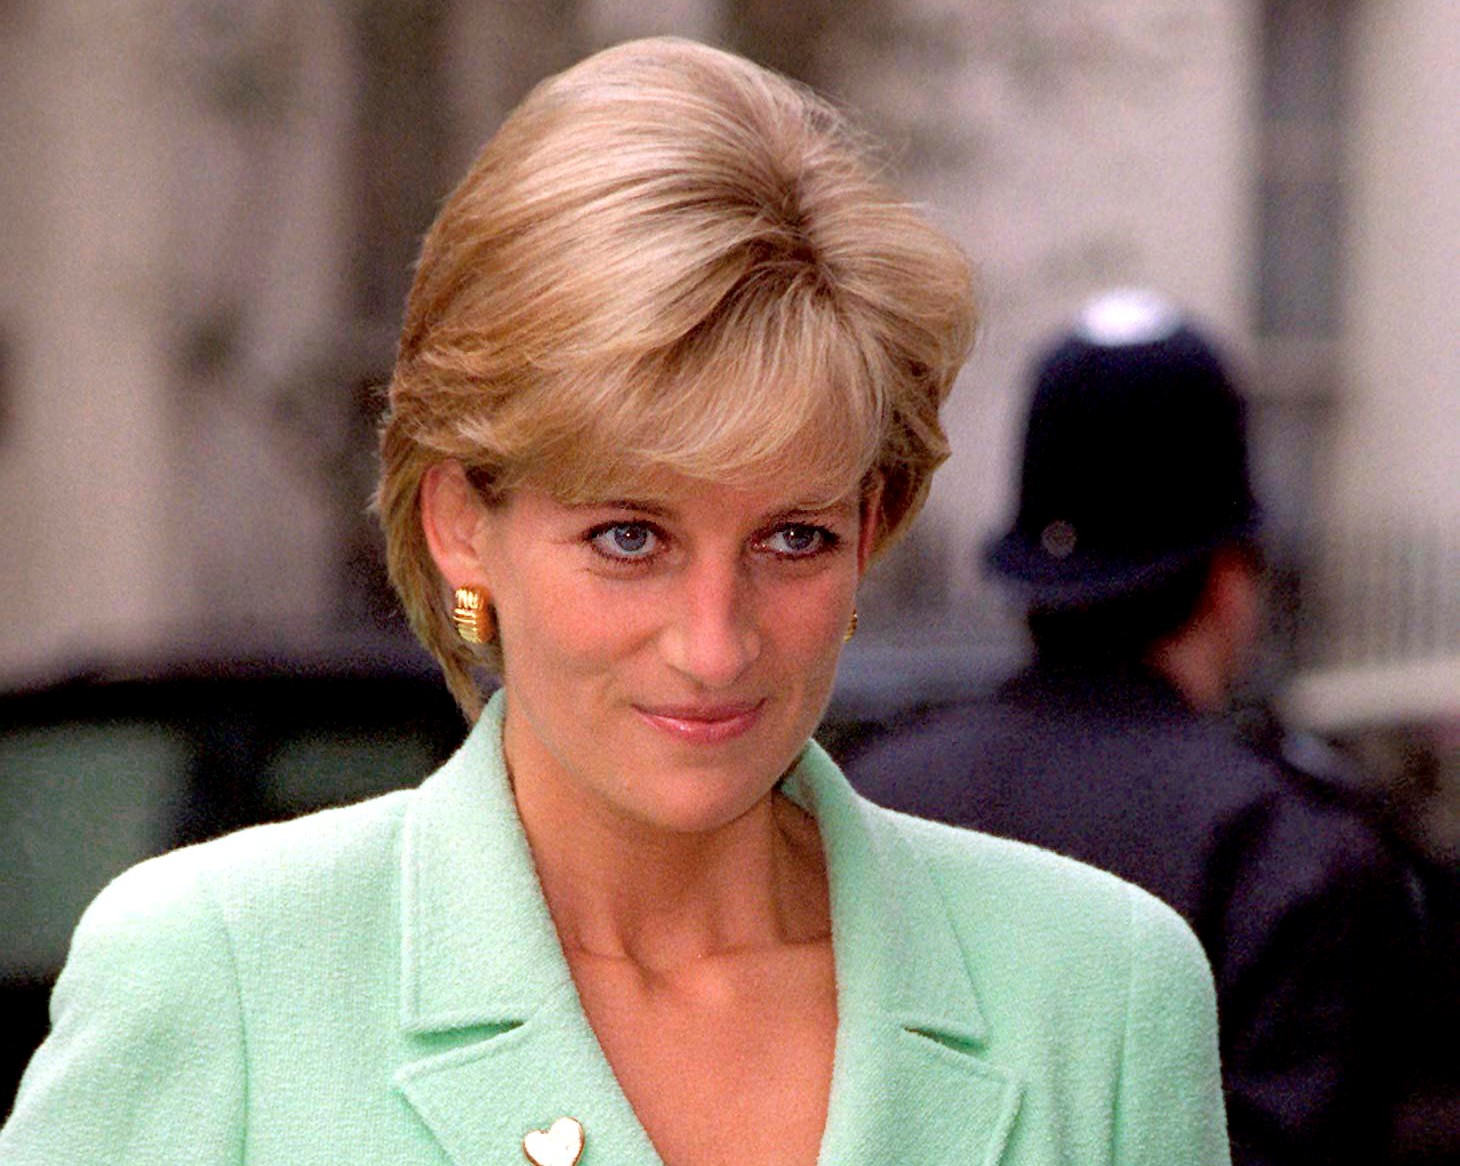 Princess Diana in pale green suit at the Great Ormond Street Hospital in London